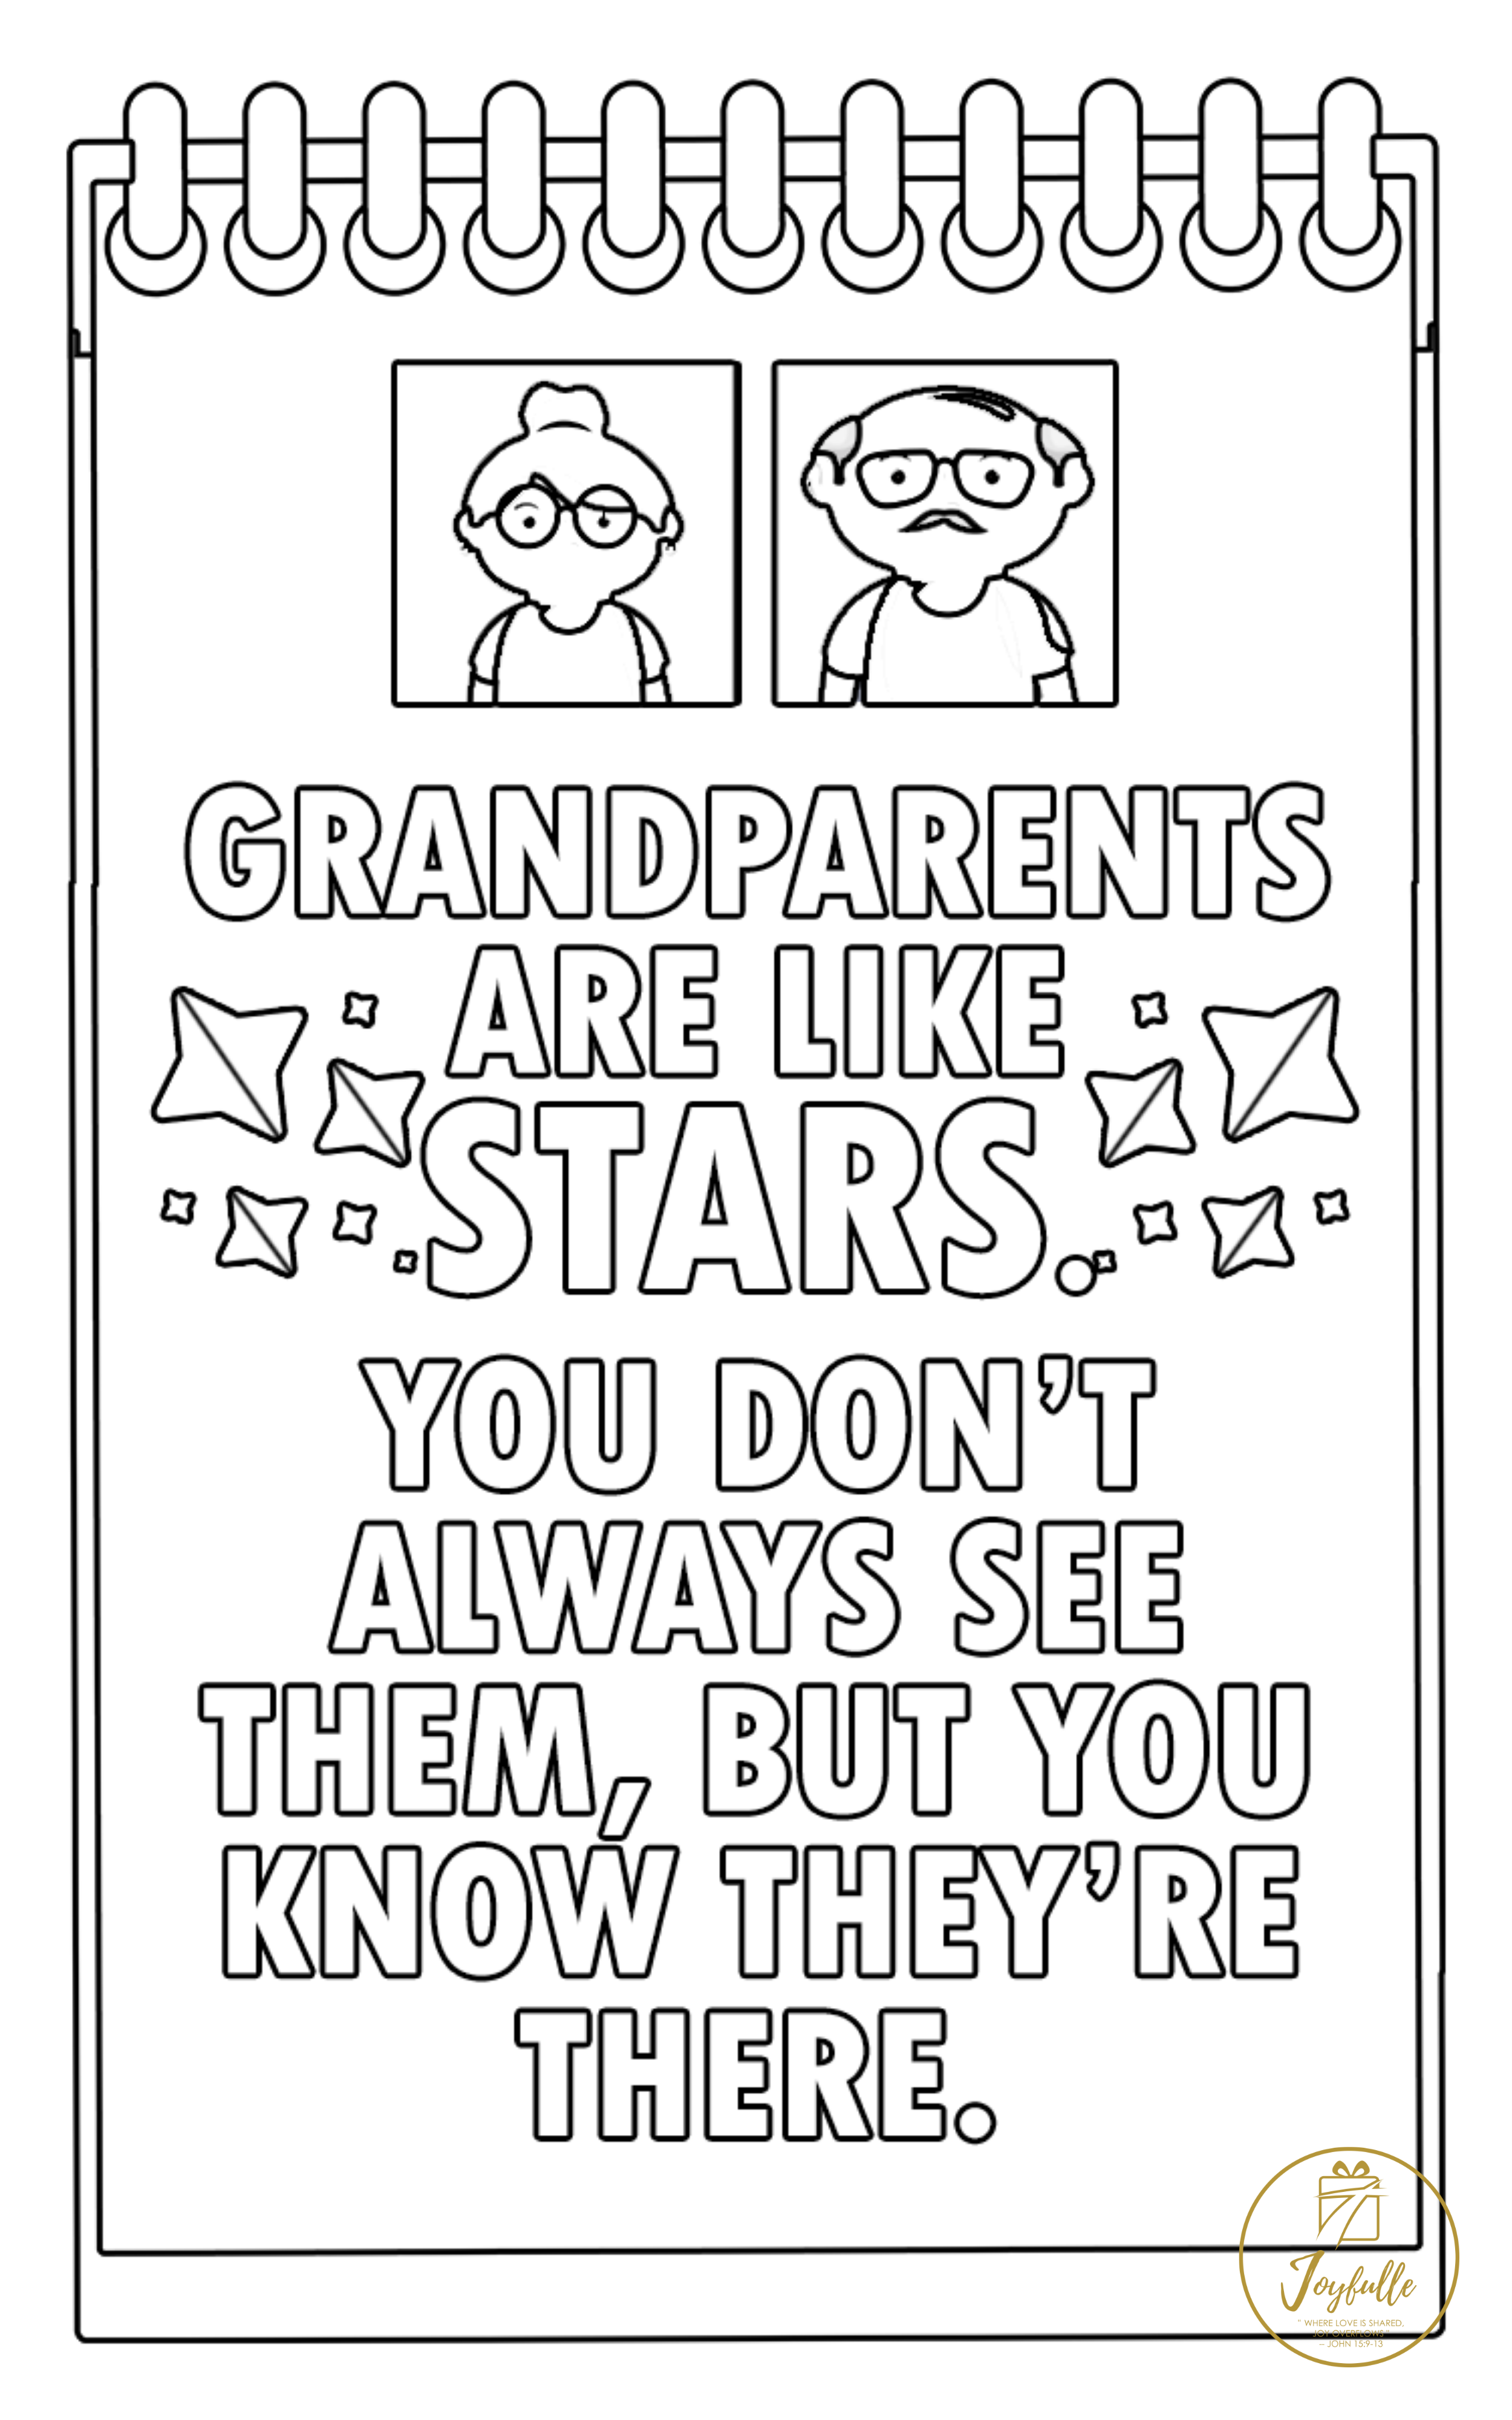 Grandparents Day Greeting Card 06